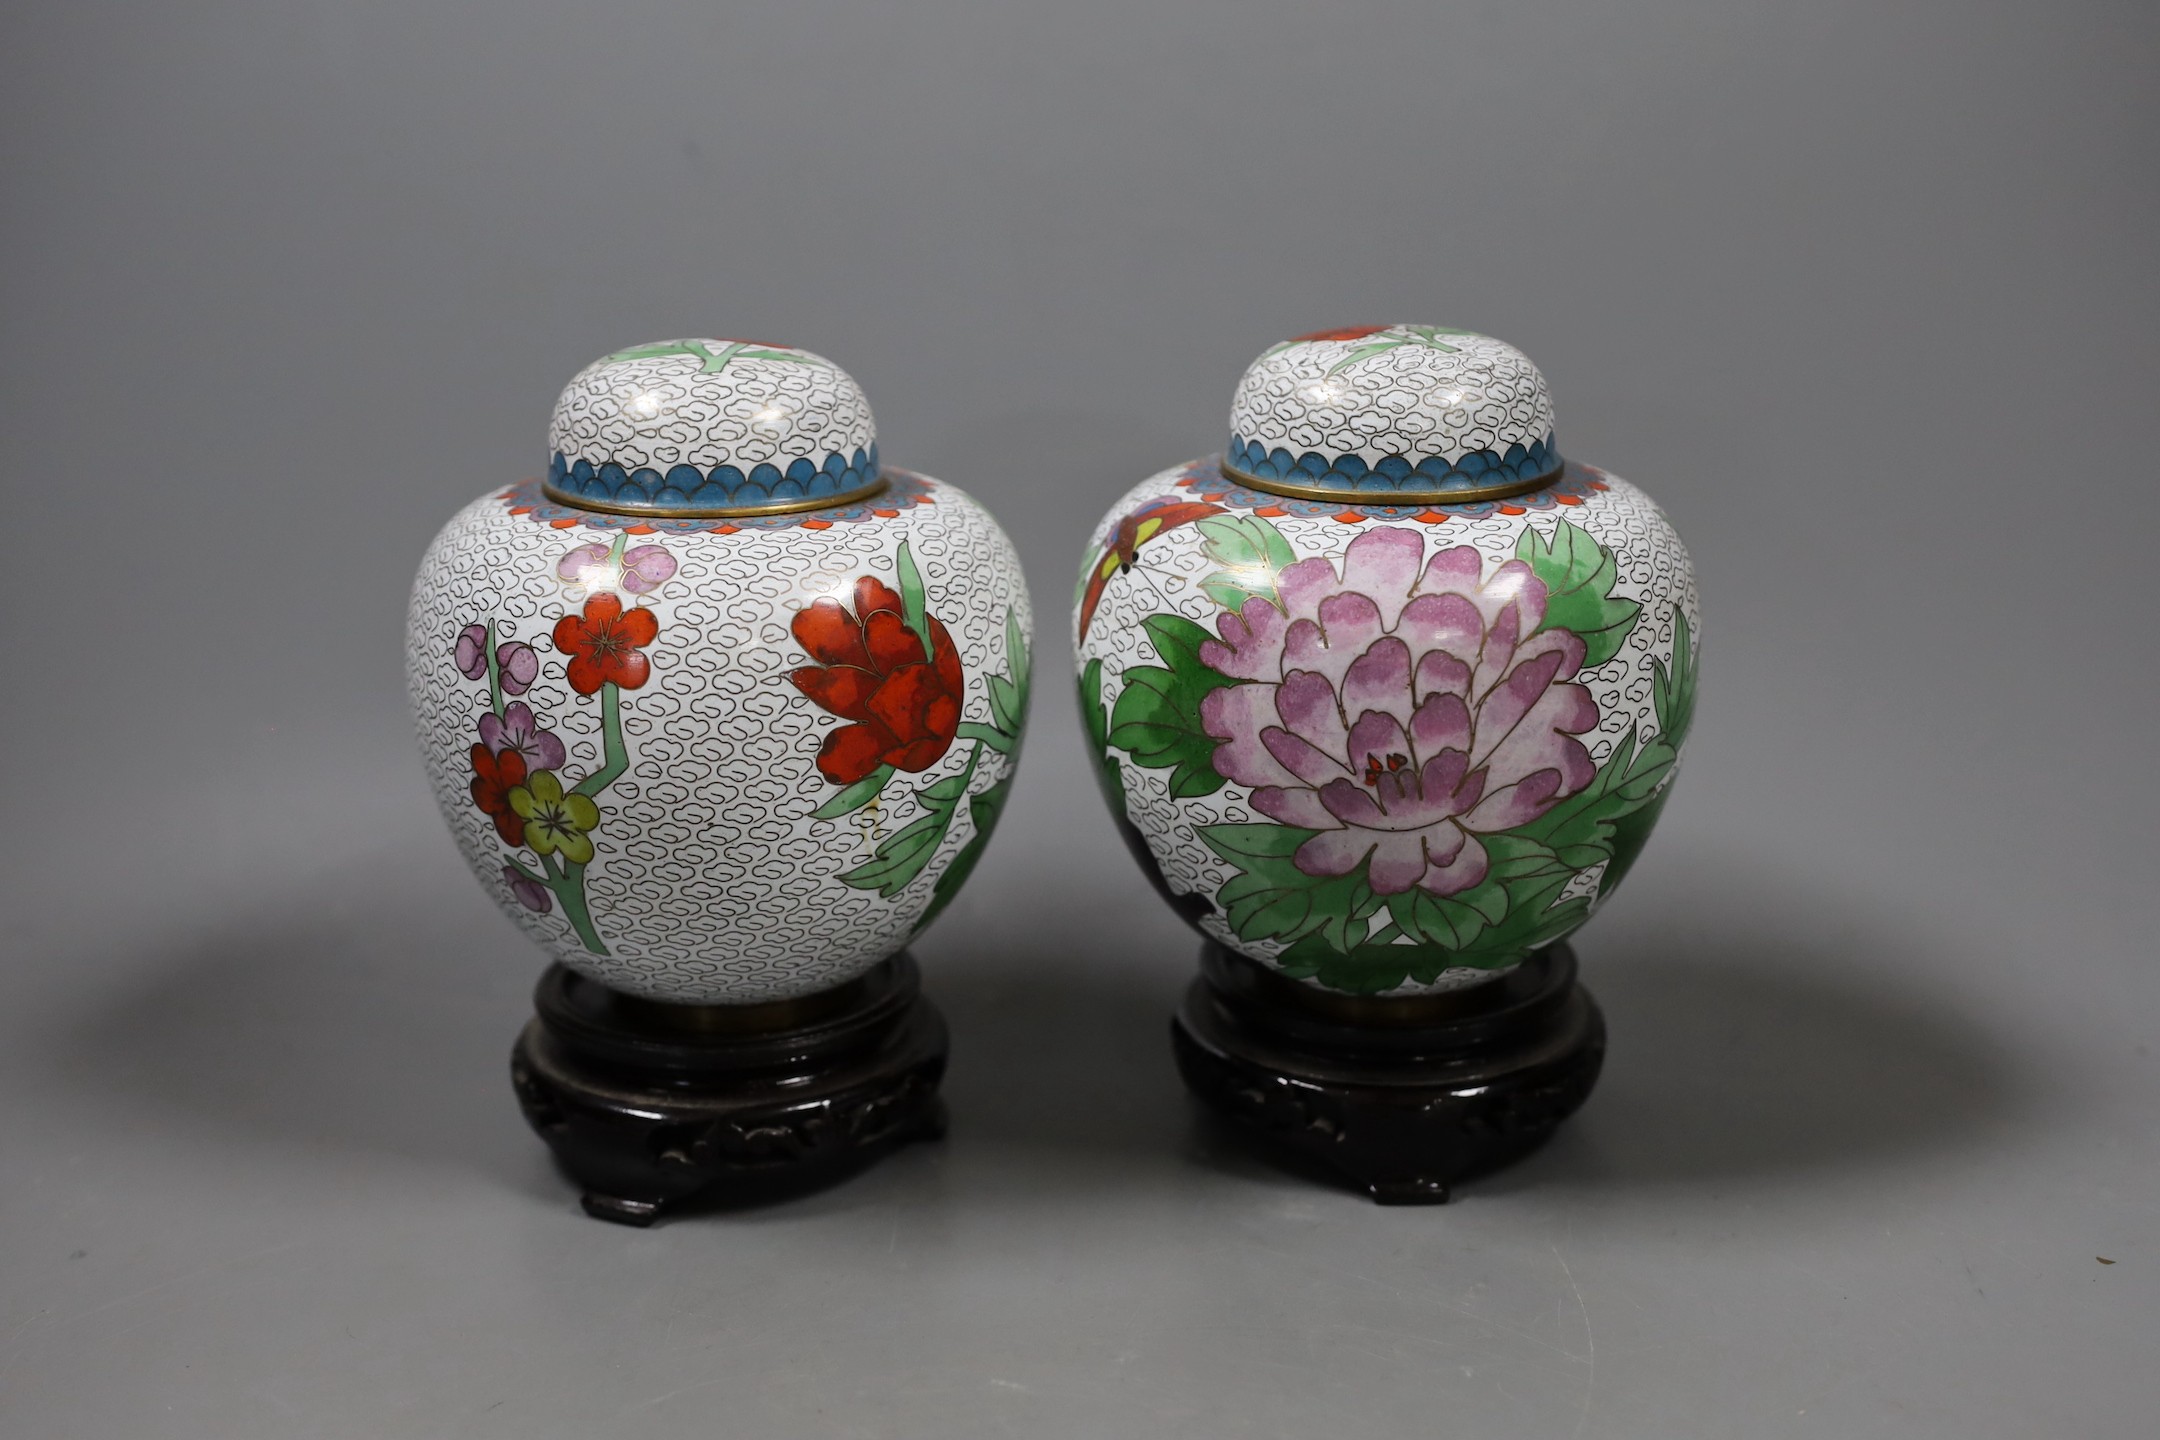 A pair of Chinese cloisonné enamel jars and covers on stands, total height 15.5 cm - Image 2 of 5